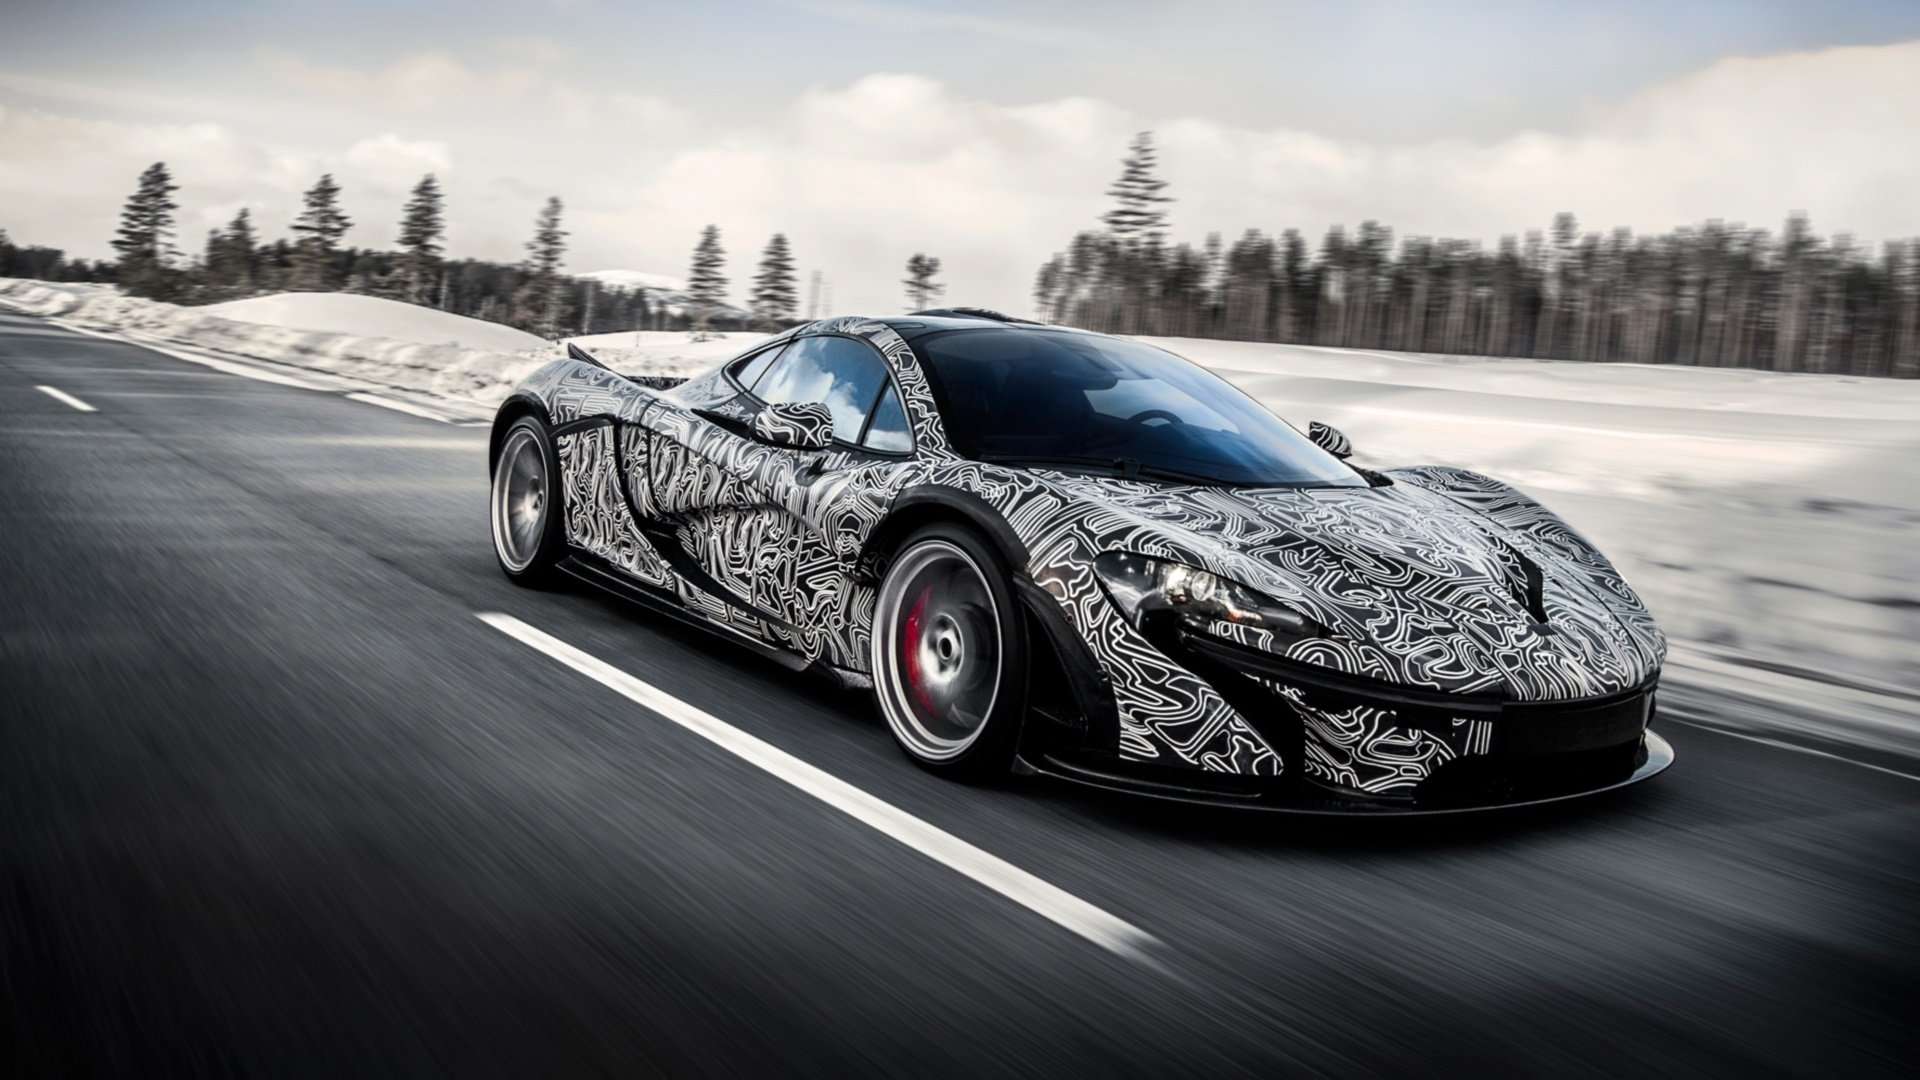 McLaren P1 Full HD Wallpaper and Background Image | 1920x1080 | ID:494654